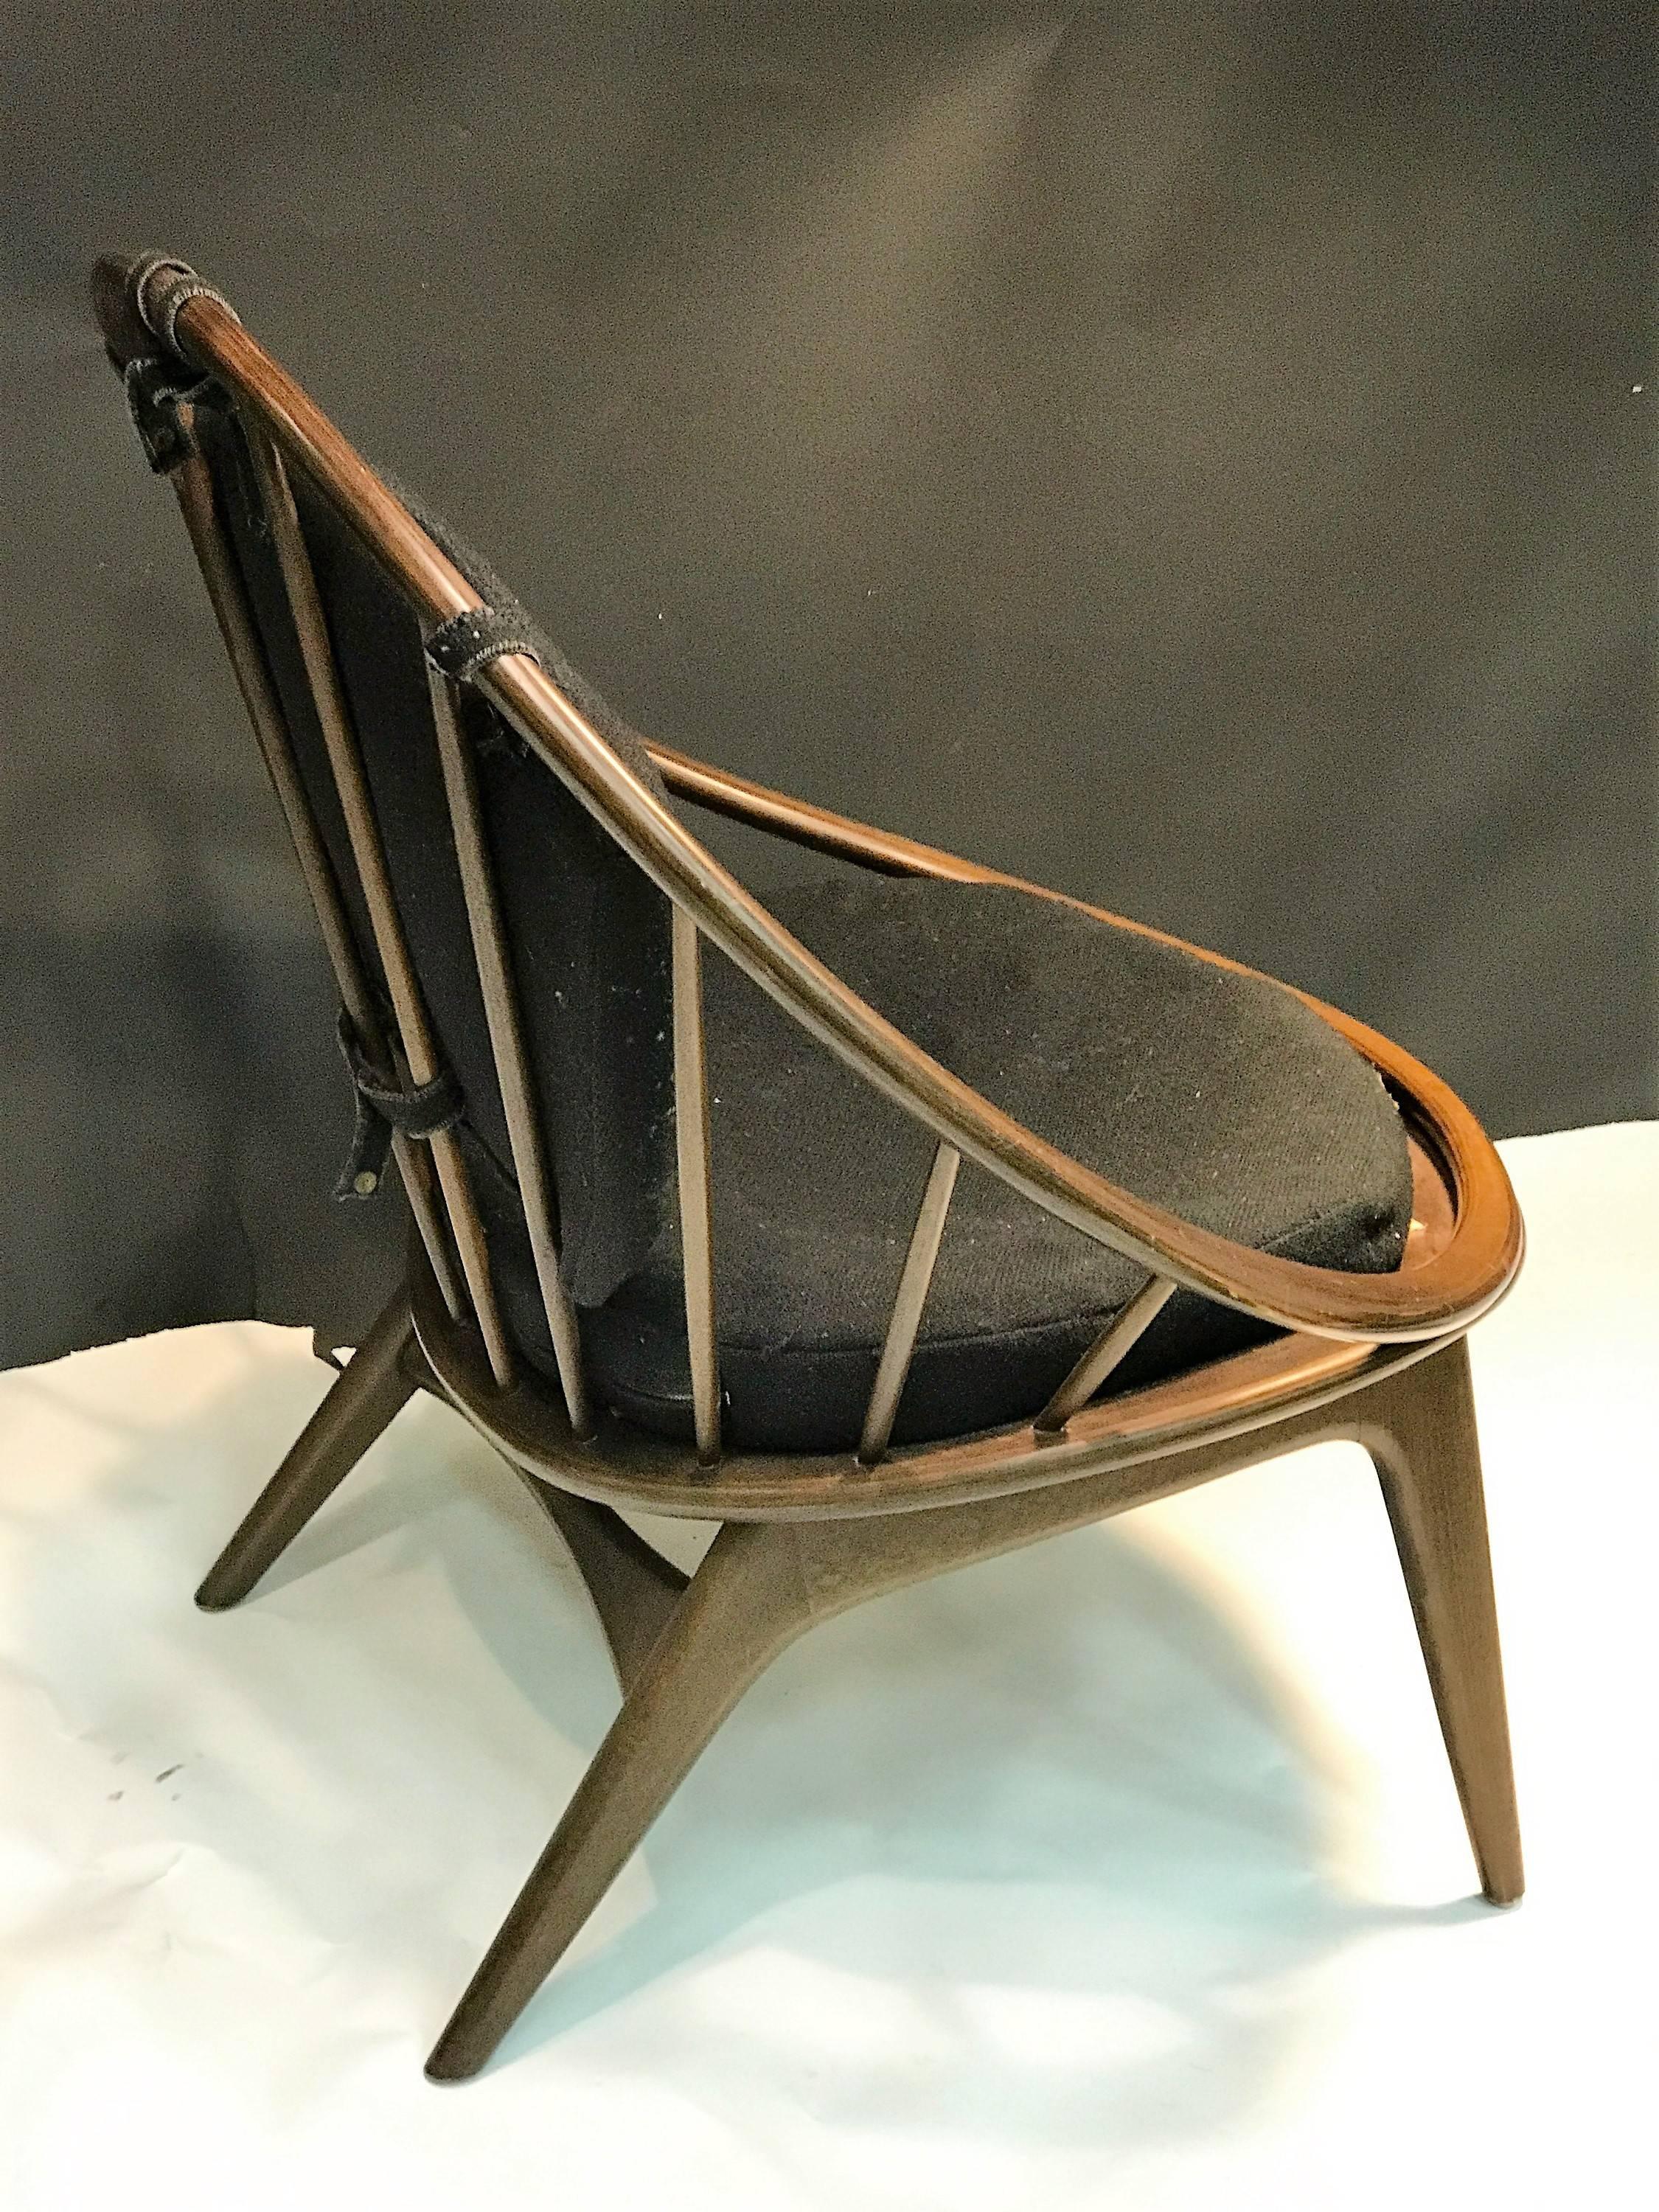 Exceptional Danish Lounge Chair  In Excellent Condition For Sale In Mount Penn, PA